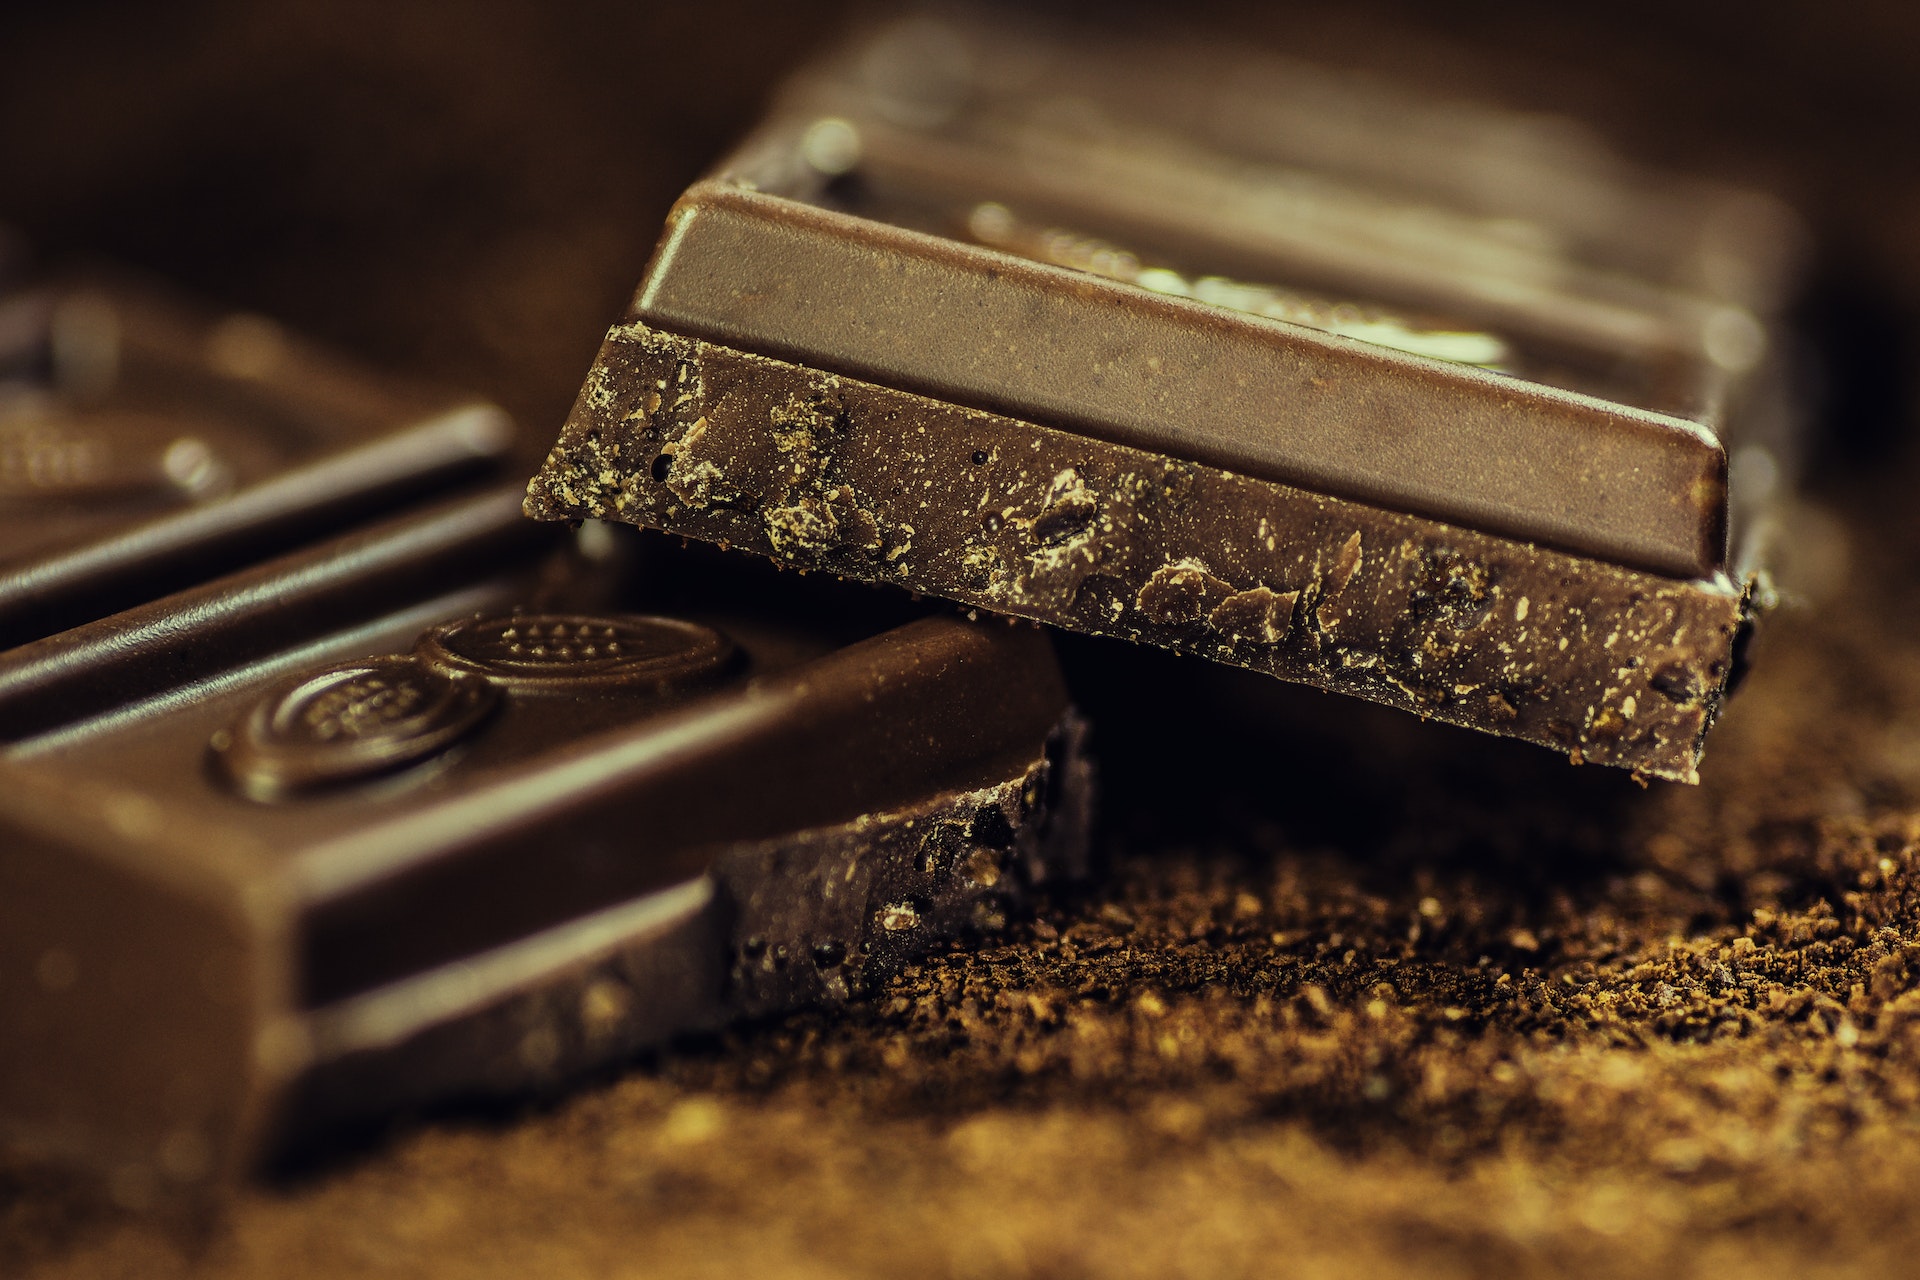 10 Surprising Health Benefits of Chocolate You Need to Know - Wiki Editions